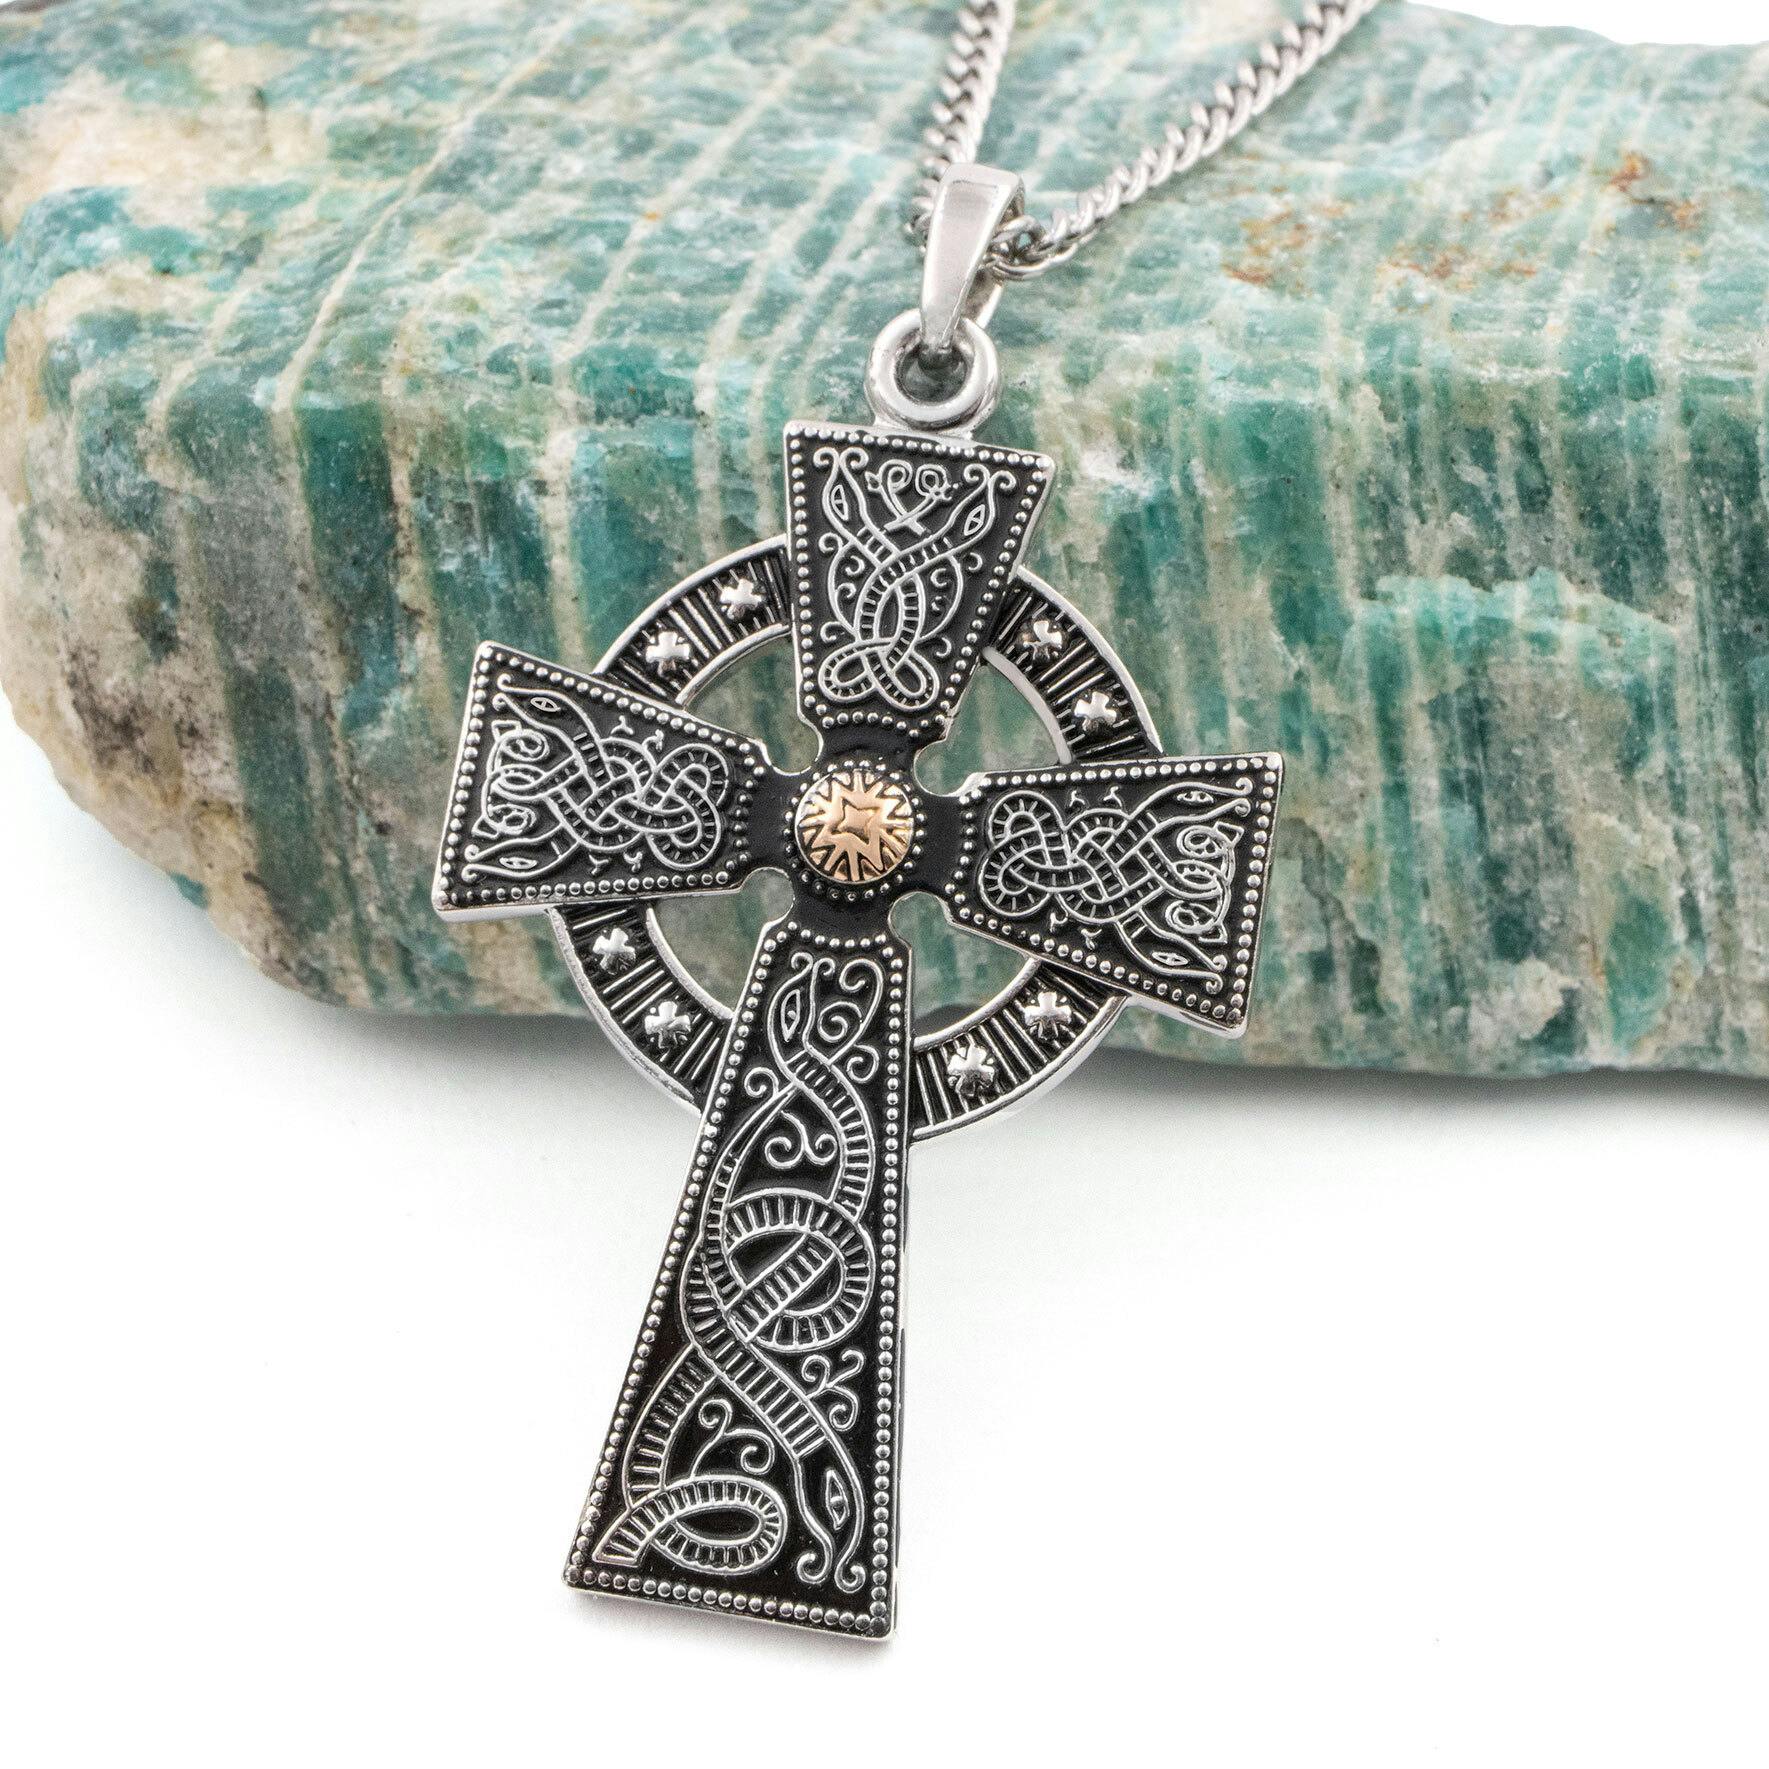 Mens Silver & Rose Gold Antiqued Celtic Cross Necklace with 20 Chain - Real Sterling Silver & Rose Gold 25.0 mm x 45.0 mm - Pendant - Gift Box